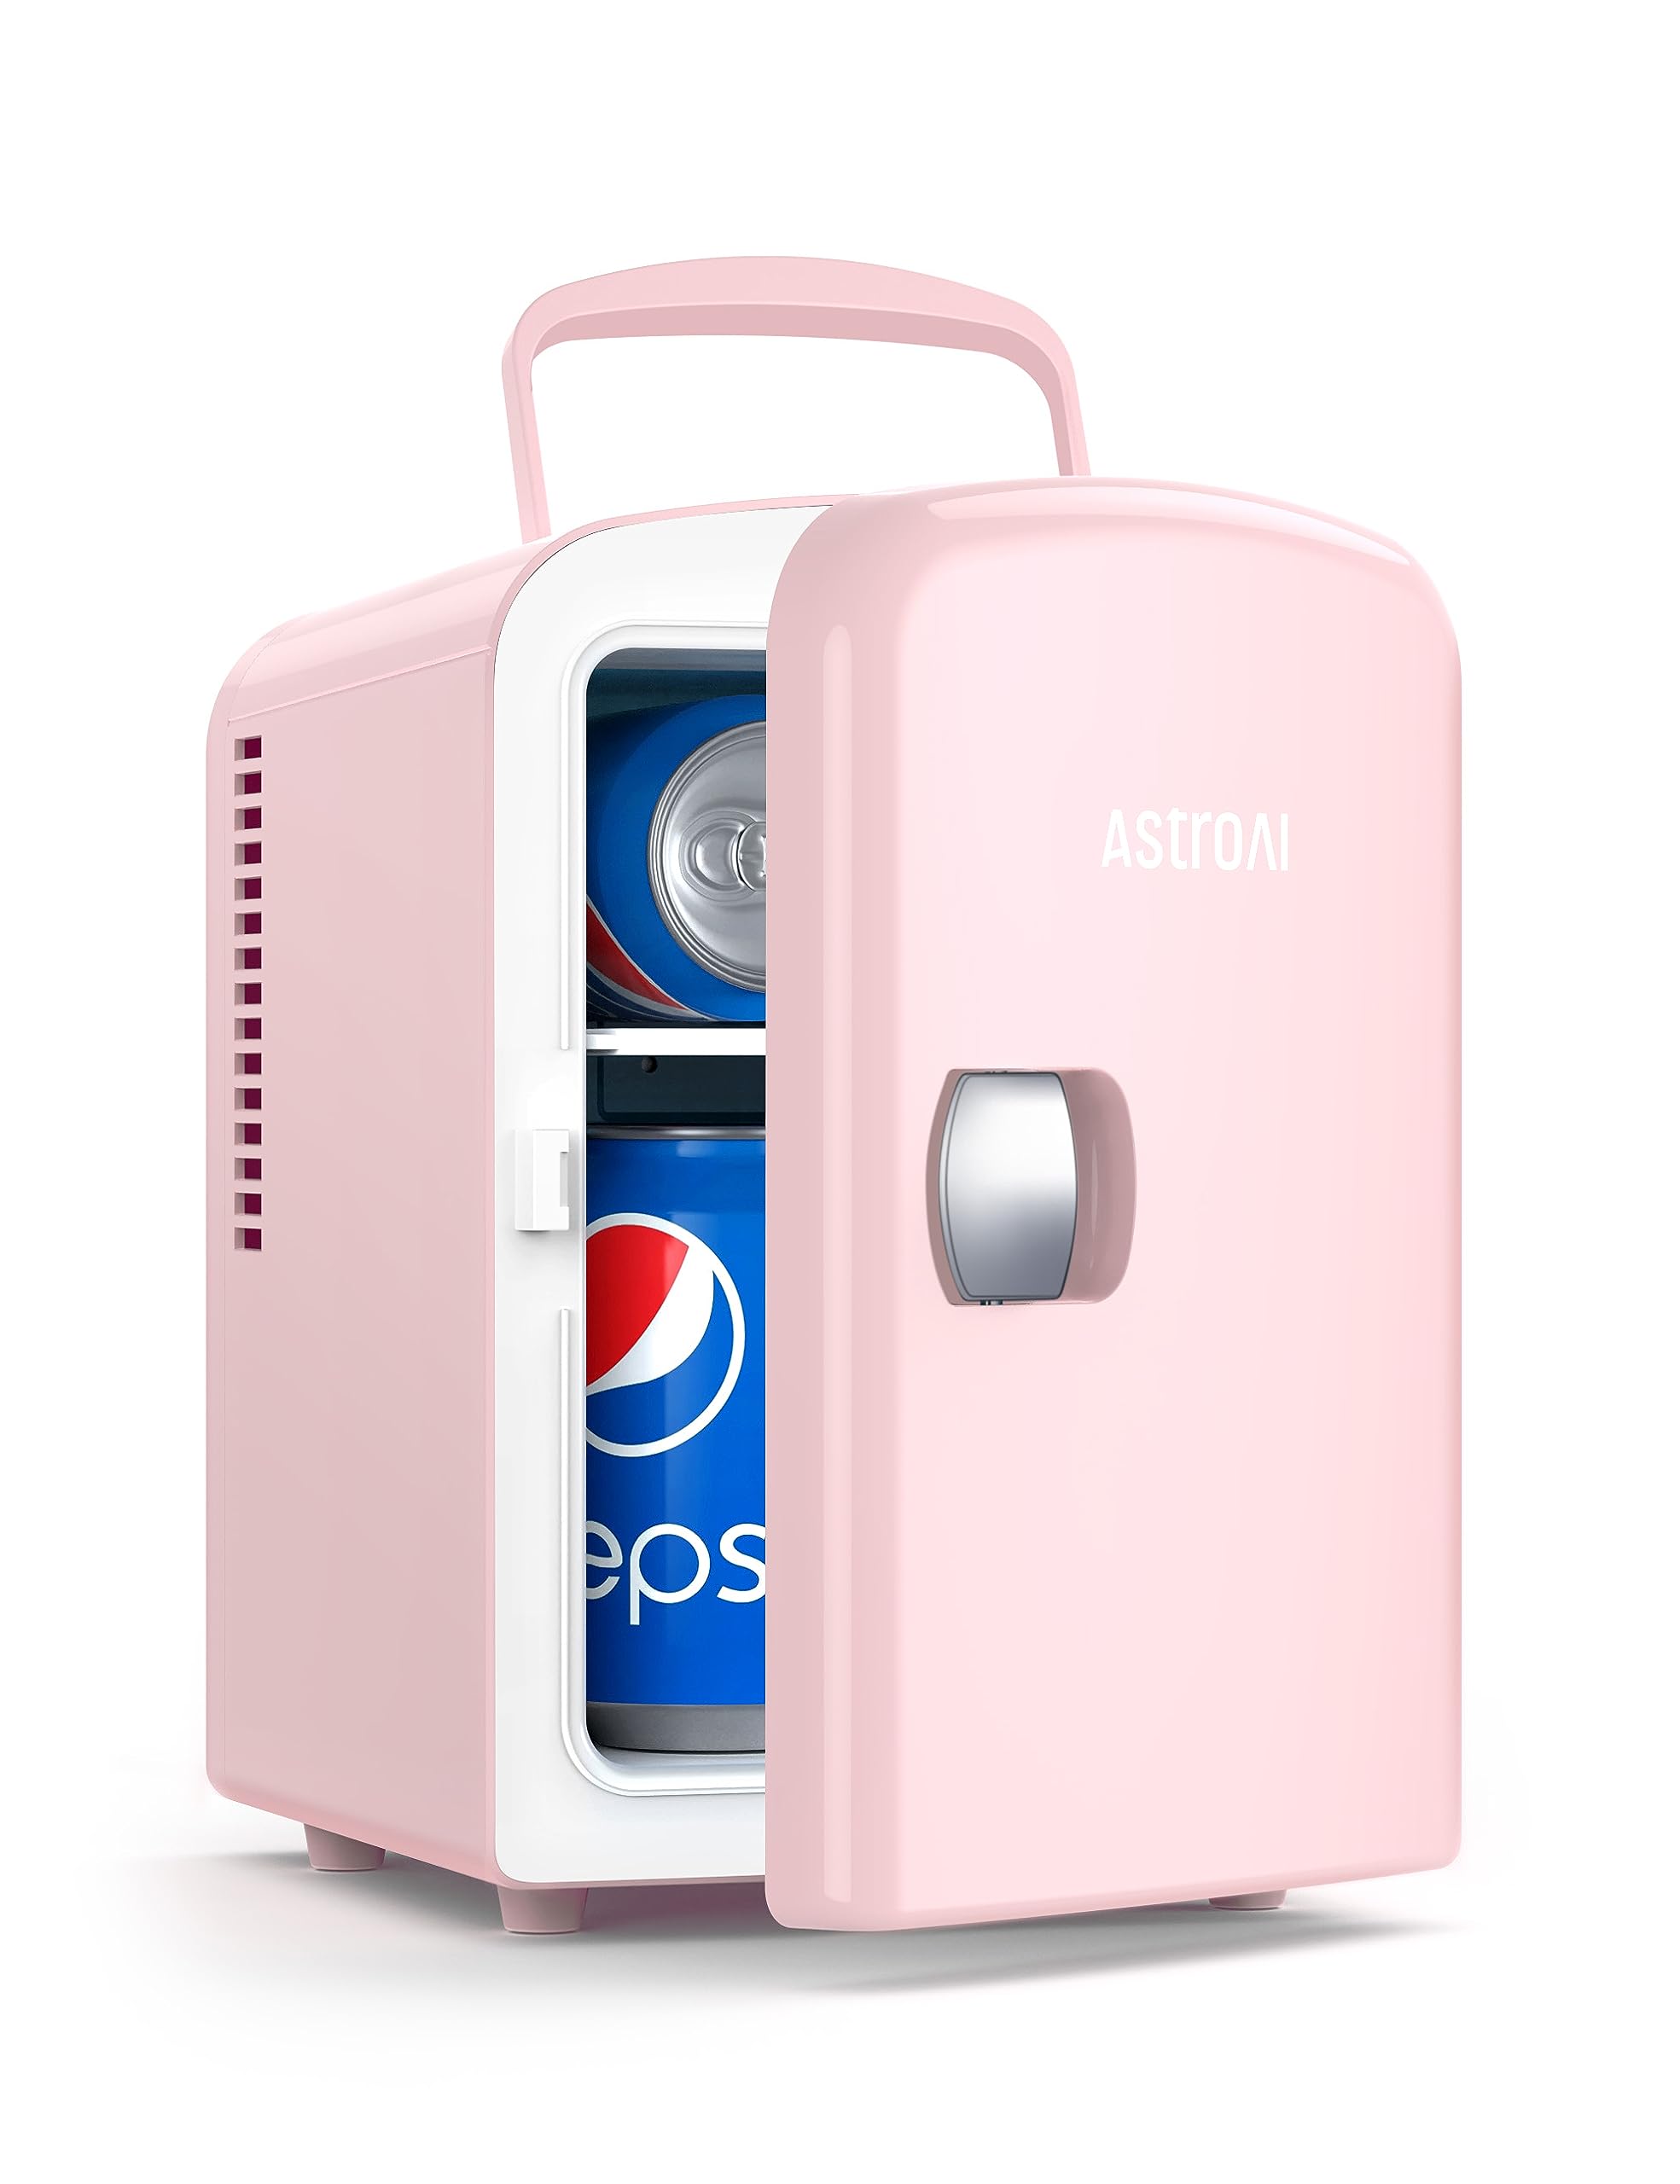 Mini Fridge 4 Liter/6 Can AC/DC Portable Thermoelectric Cooler and Warmer for Skincare, Breast Milk, Foods, Medications, Home and Travel (White)